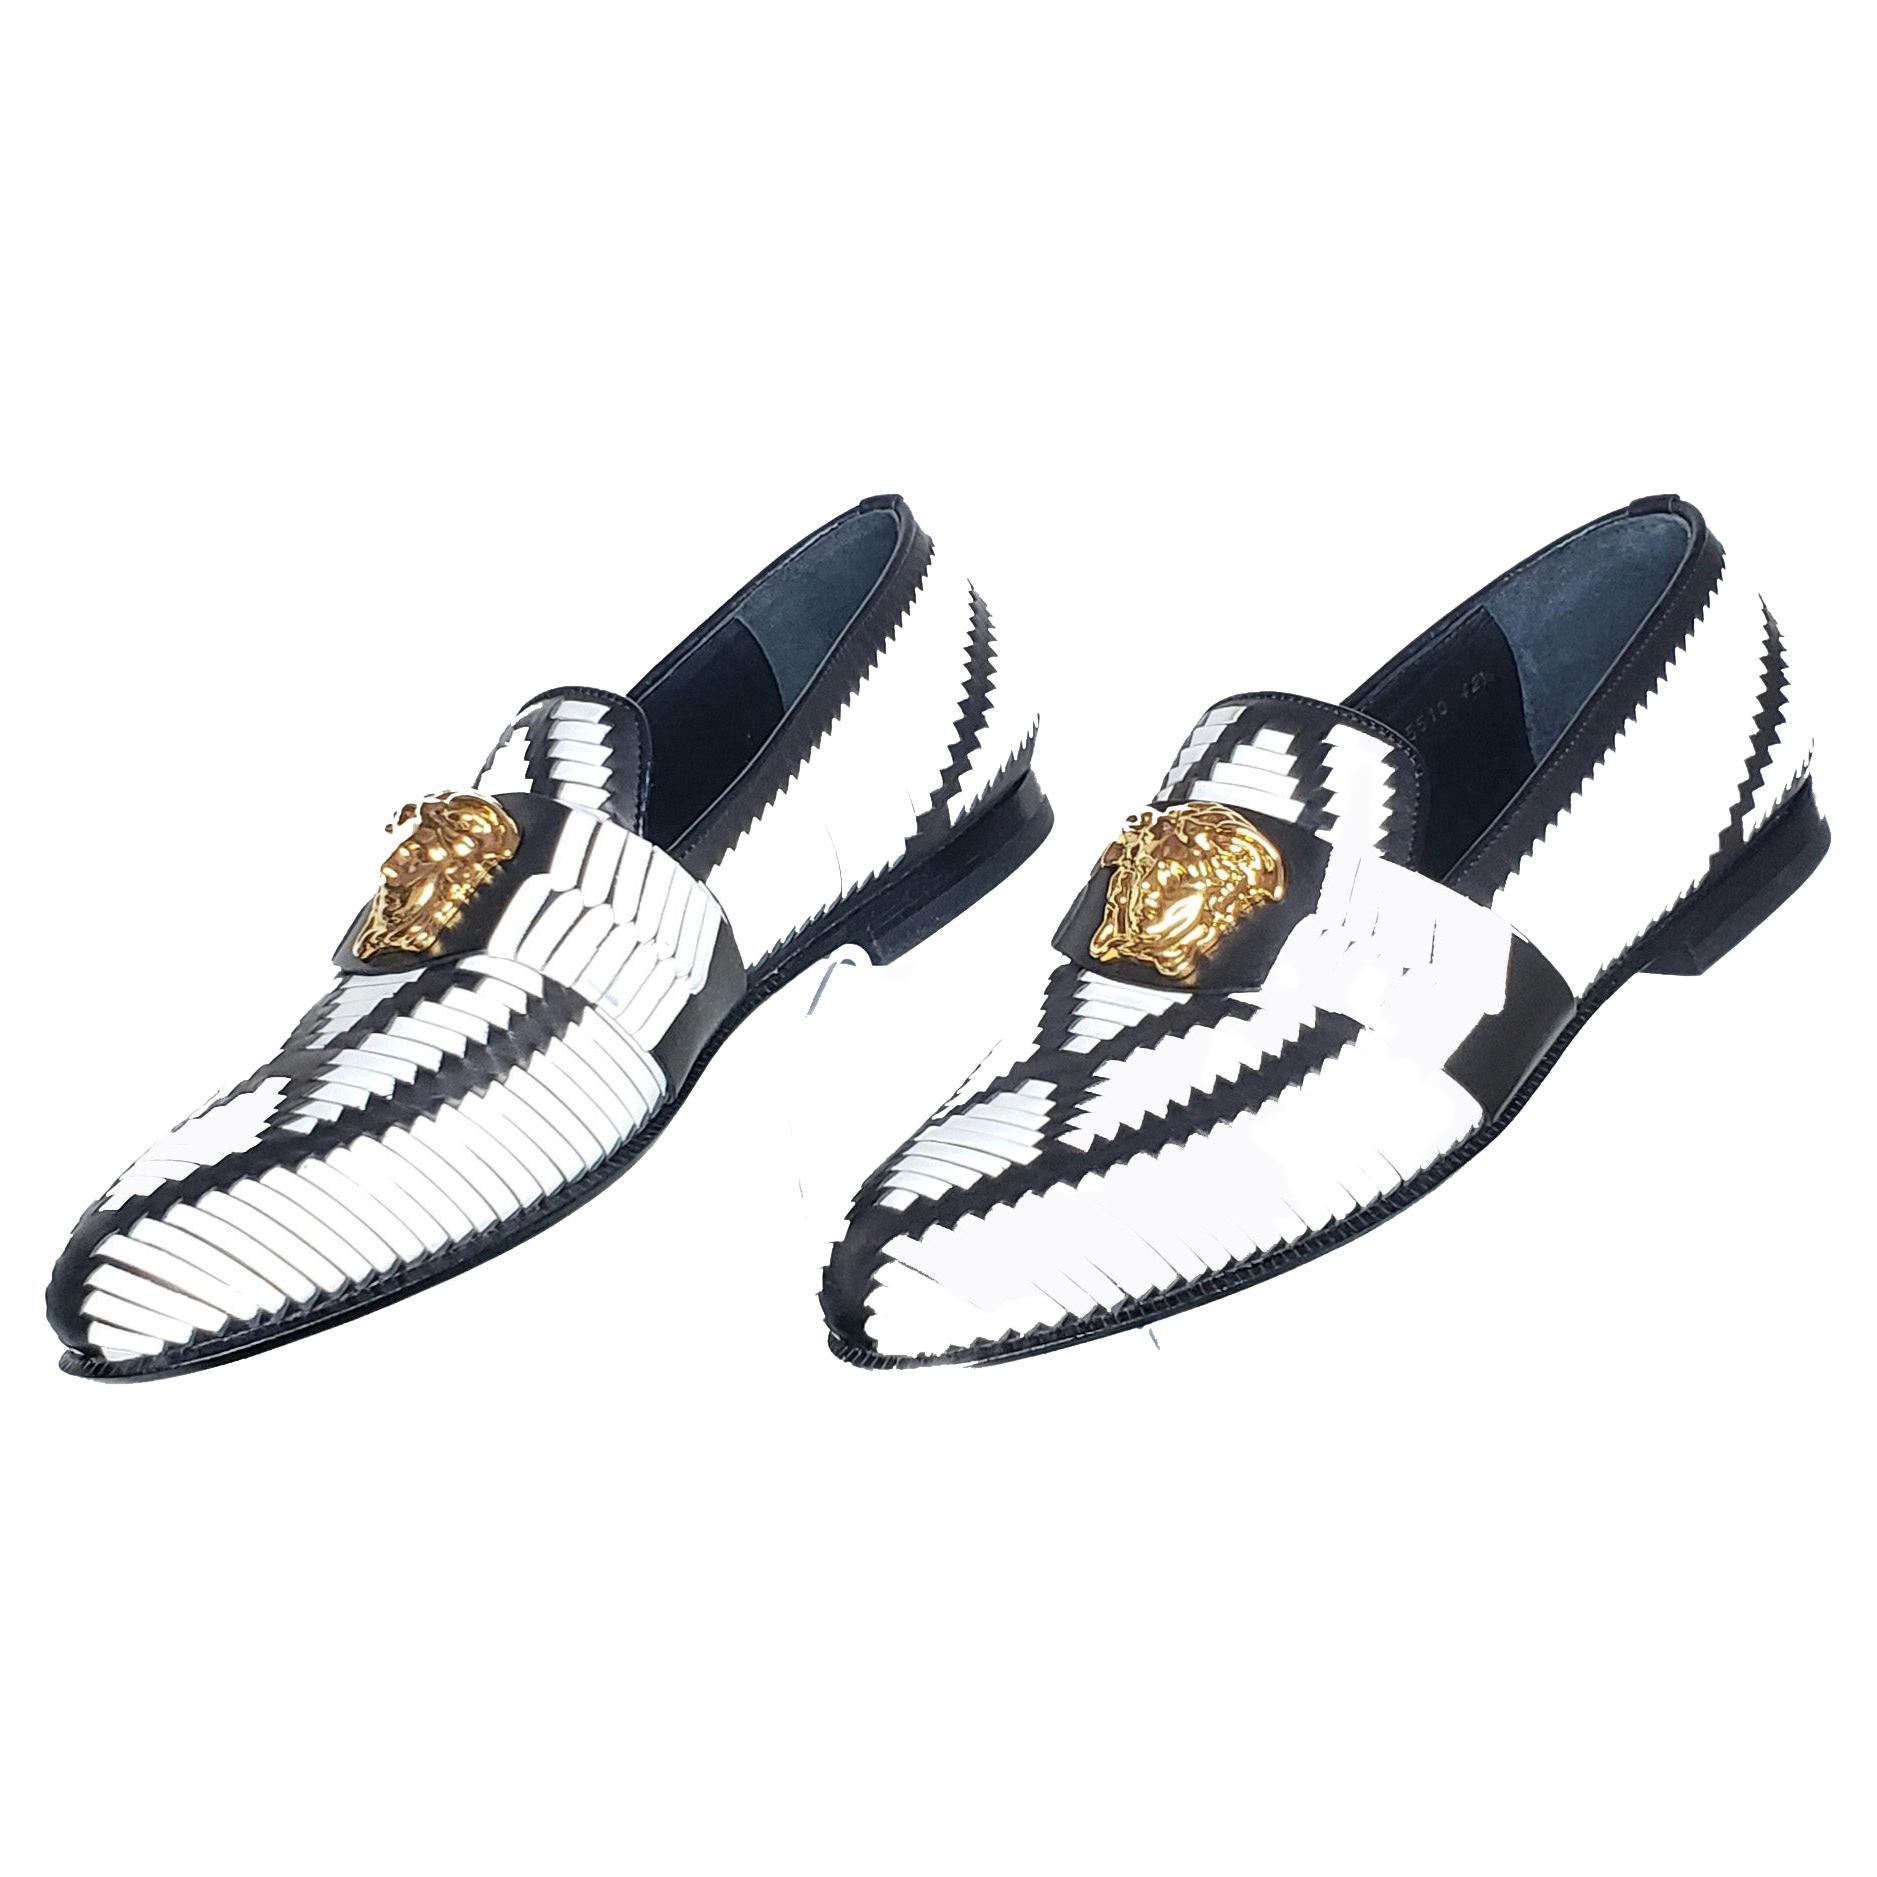 S/S 2015 Look # 38 VERSACE WOVEN BICOLOR LOAFERS Size 42.5 - 9.5 For Sale